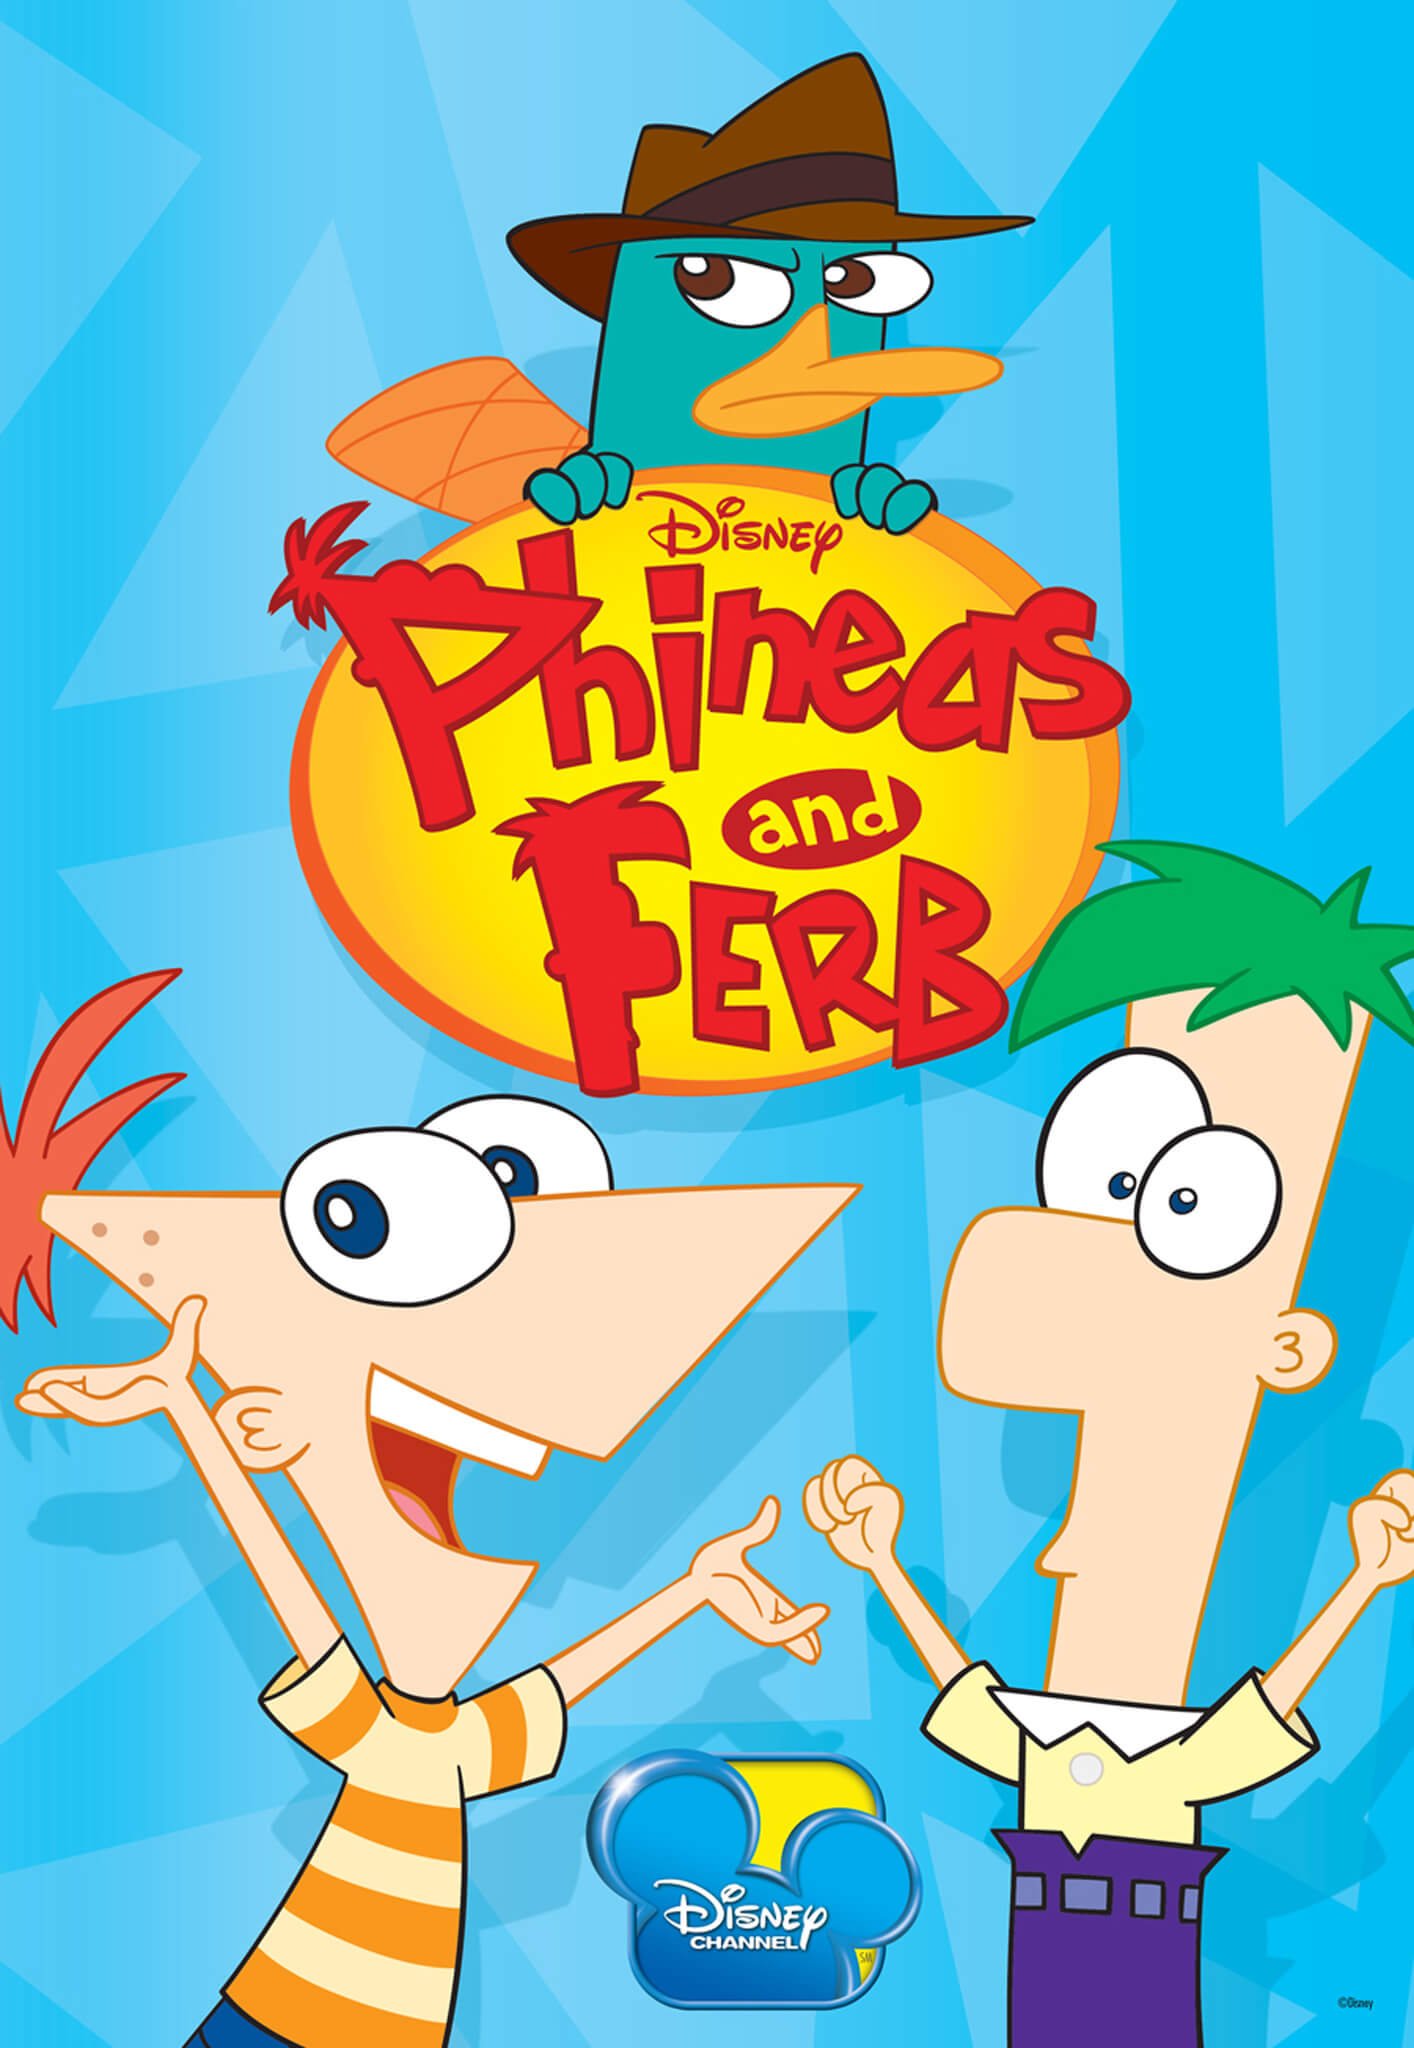 phineas-and-ferb-tv-series.jpg